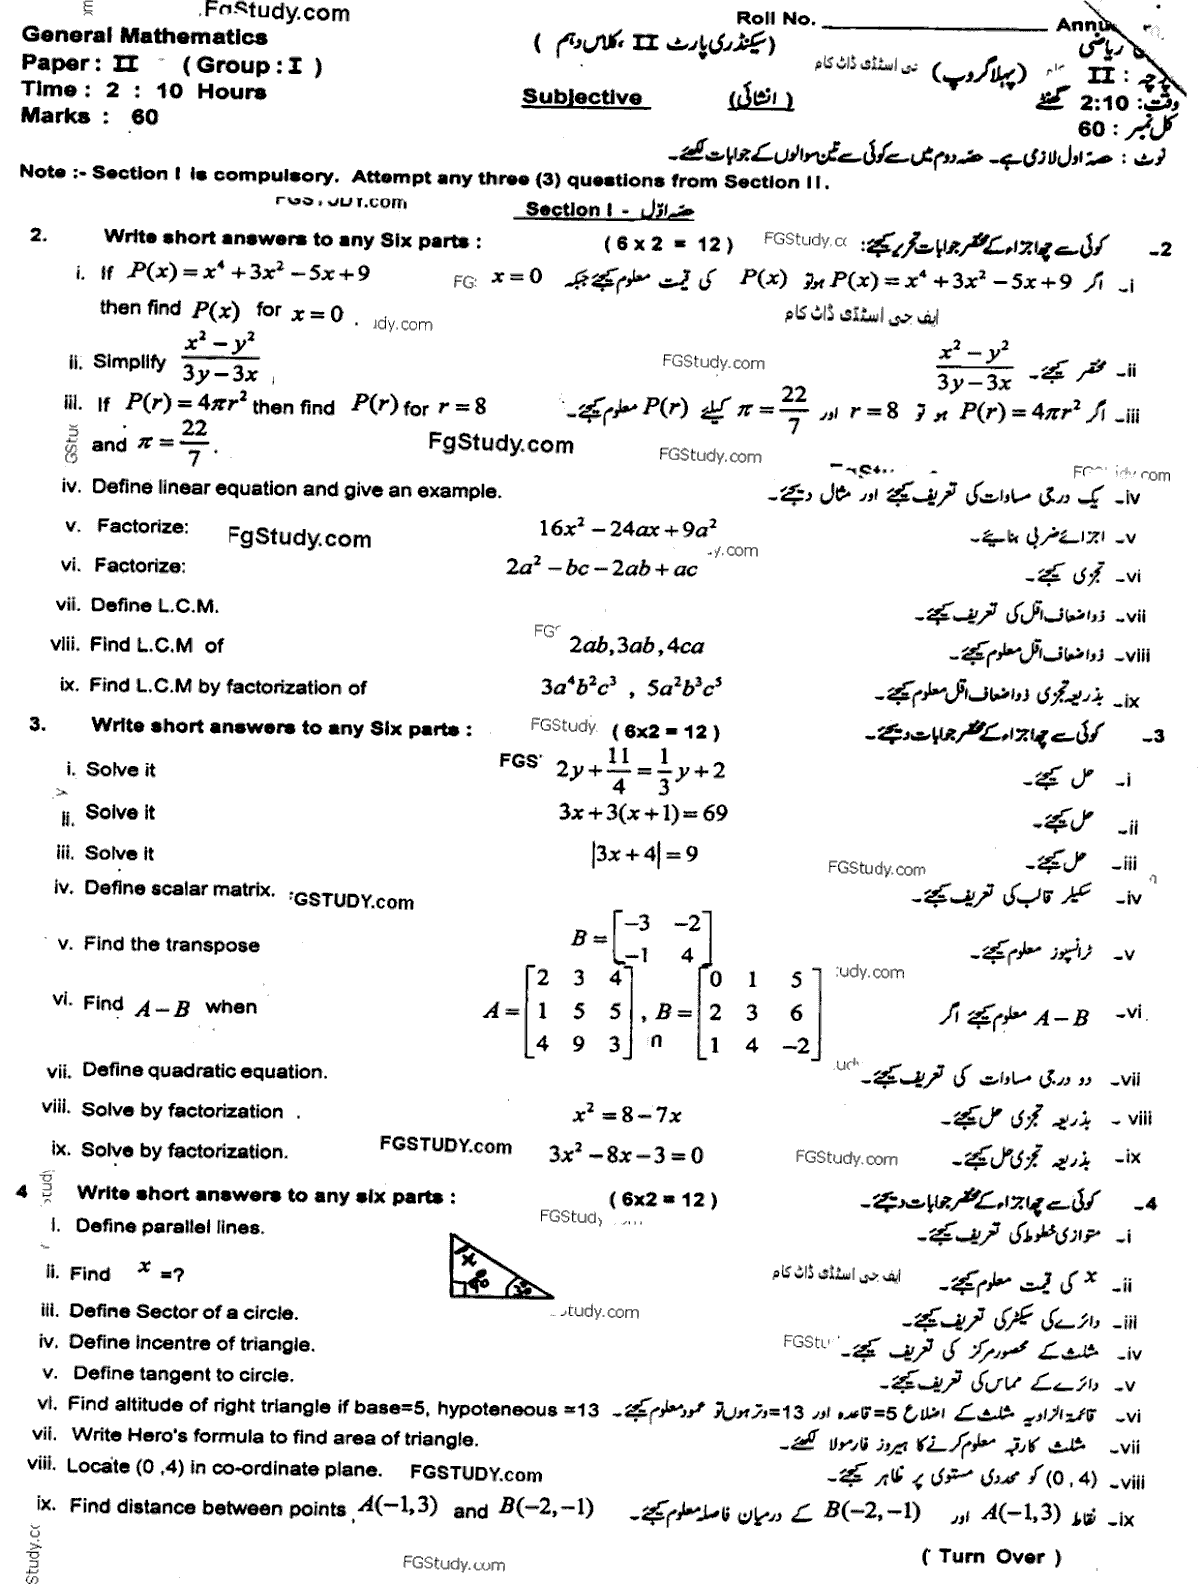 10th Class Gen Maths Past Paper 2019 Group 1 Subjective Sahiwal Board